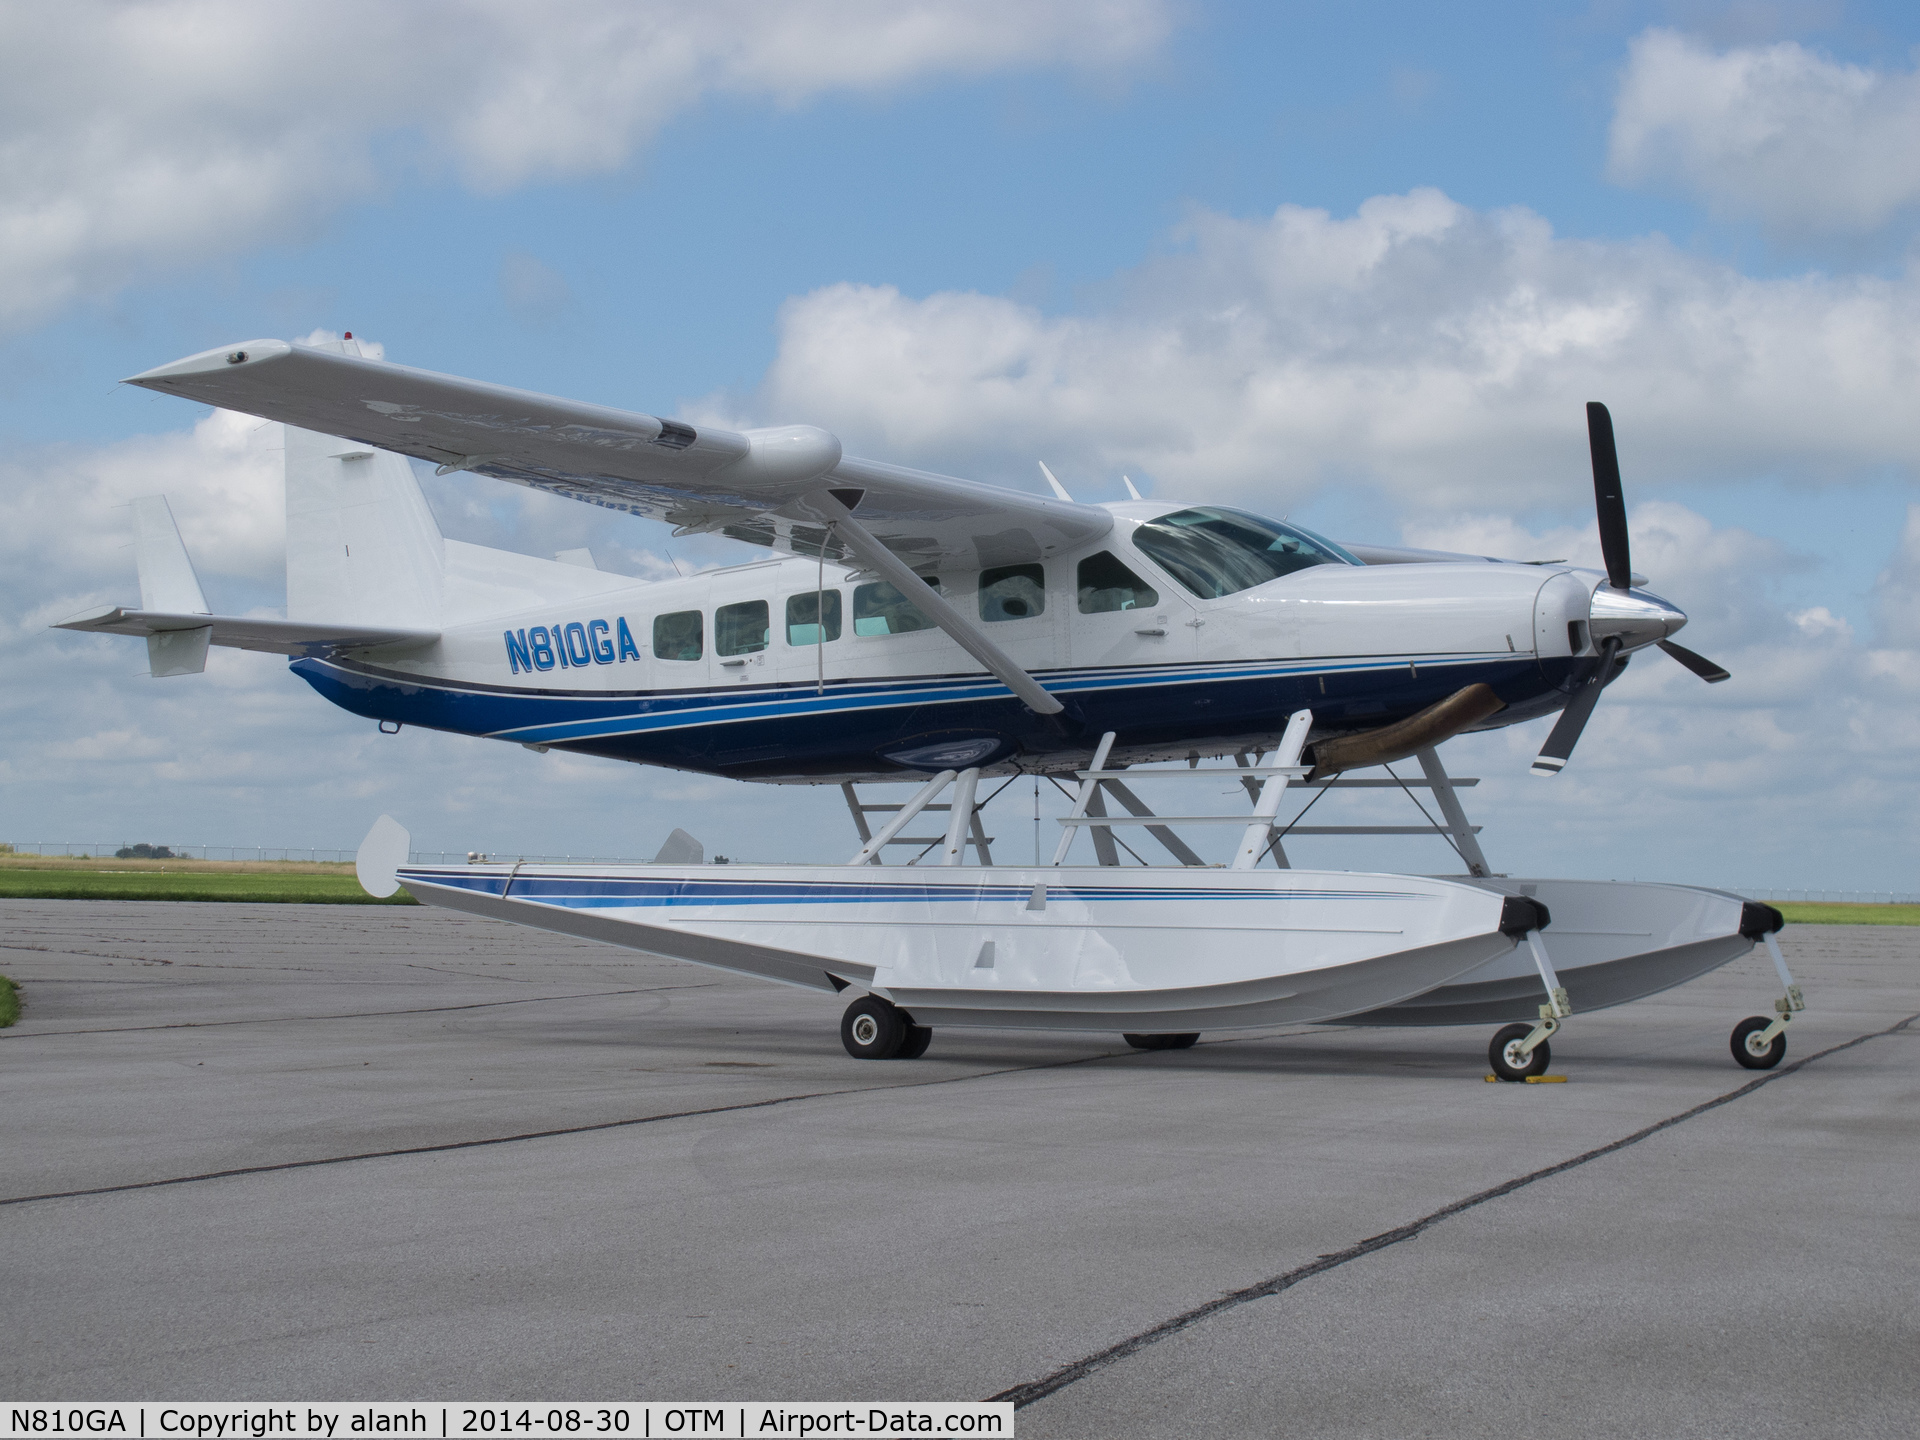 N810GA, 1999 Cessna 208 Caravan I C/N 20800300, On the ramp at Ottumwa, after overflying the waterlogged Antique Airfield